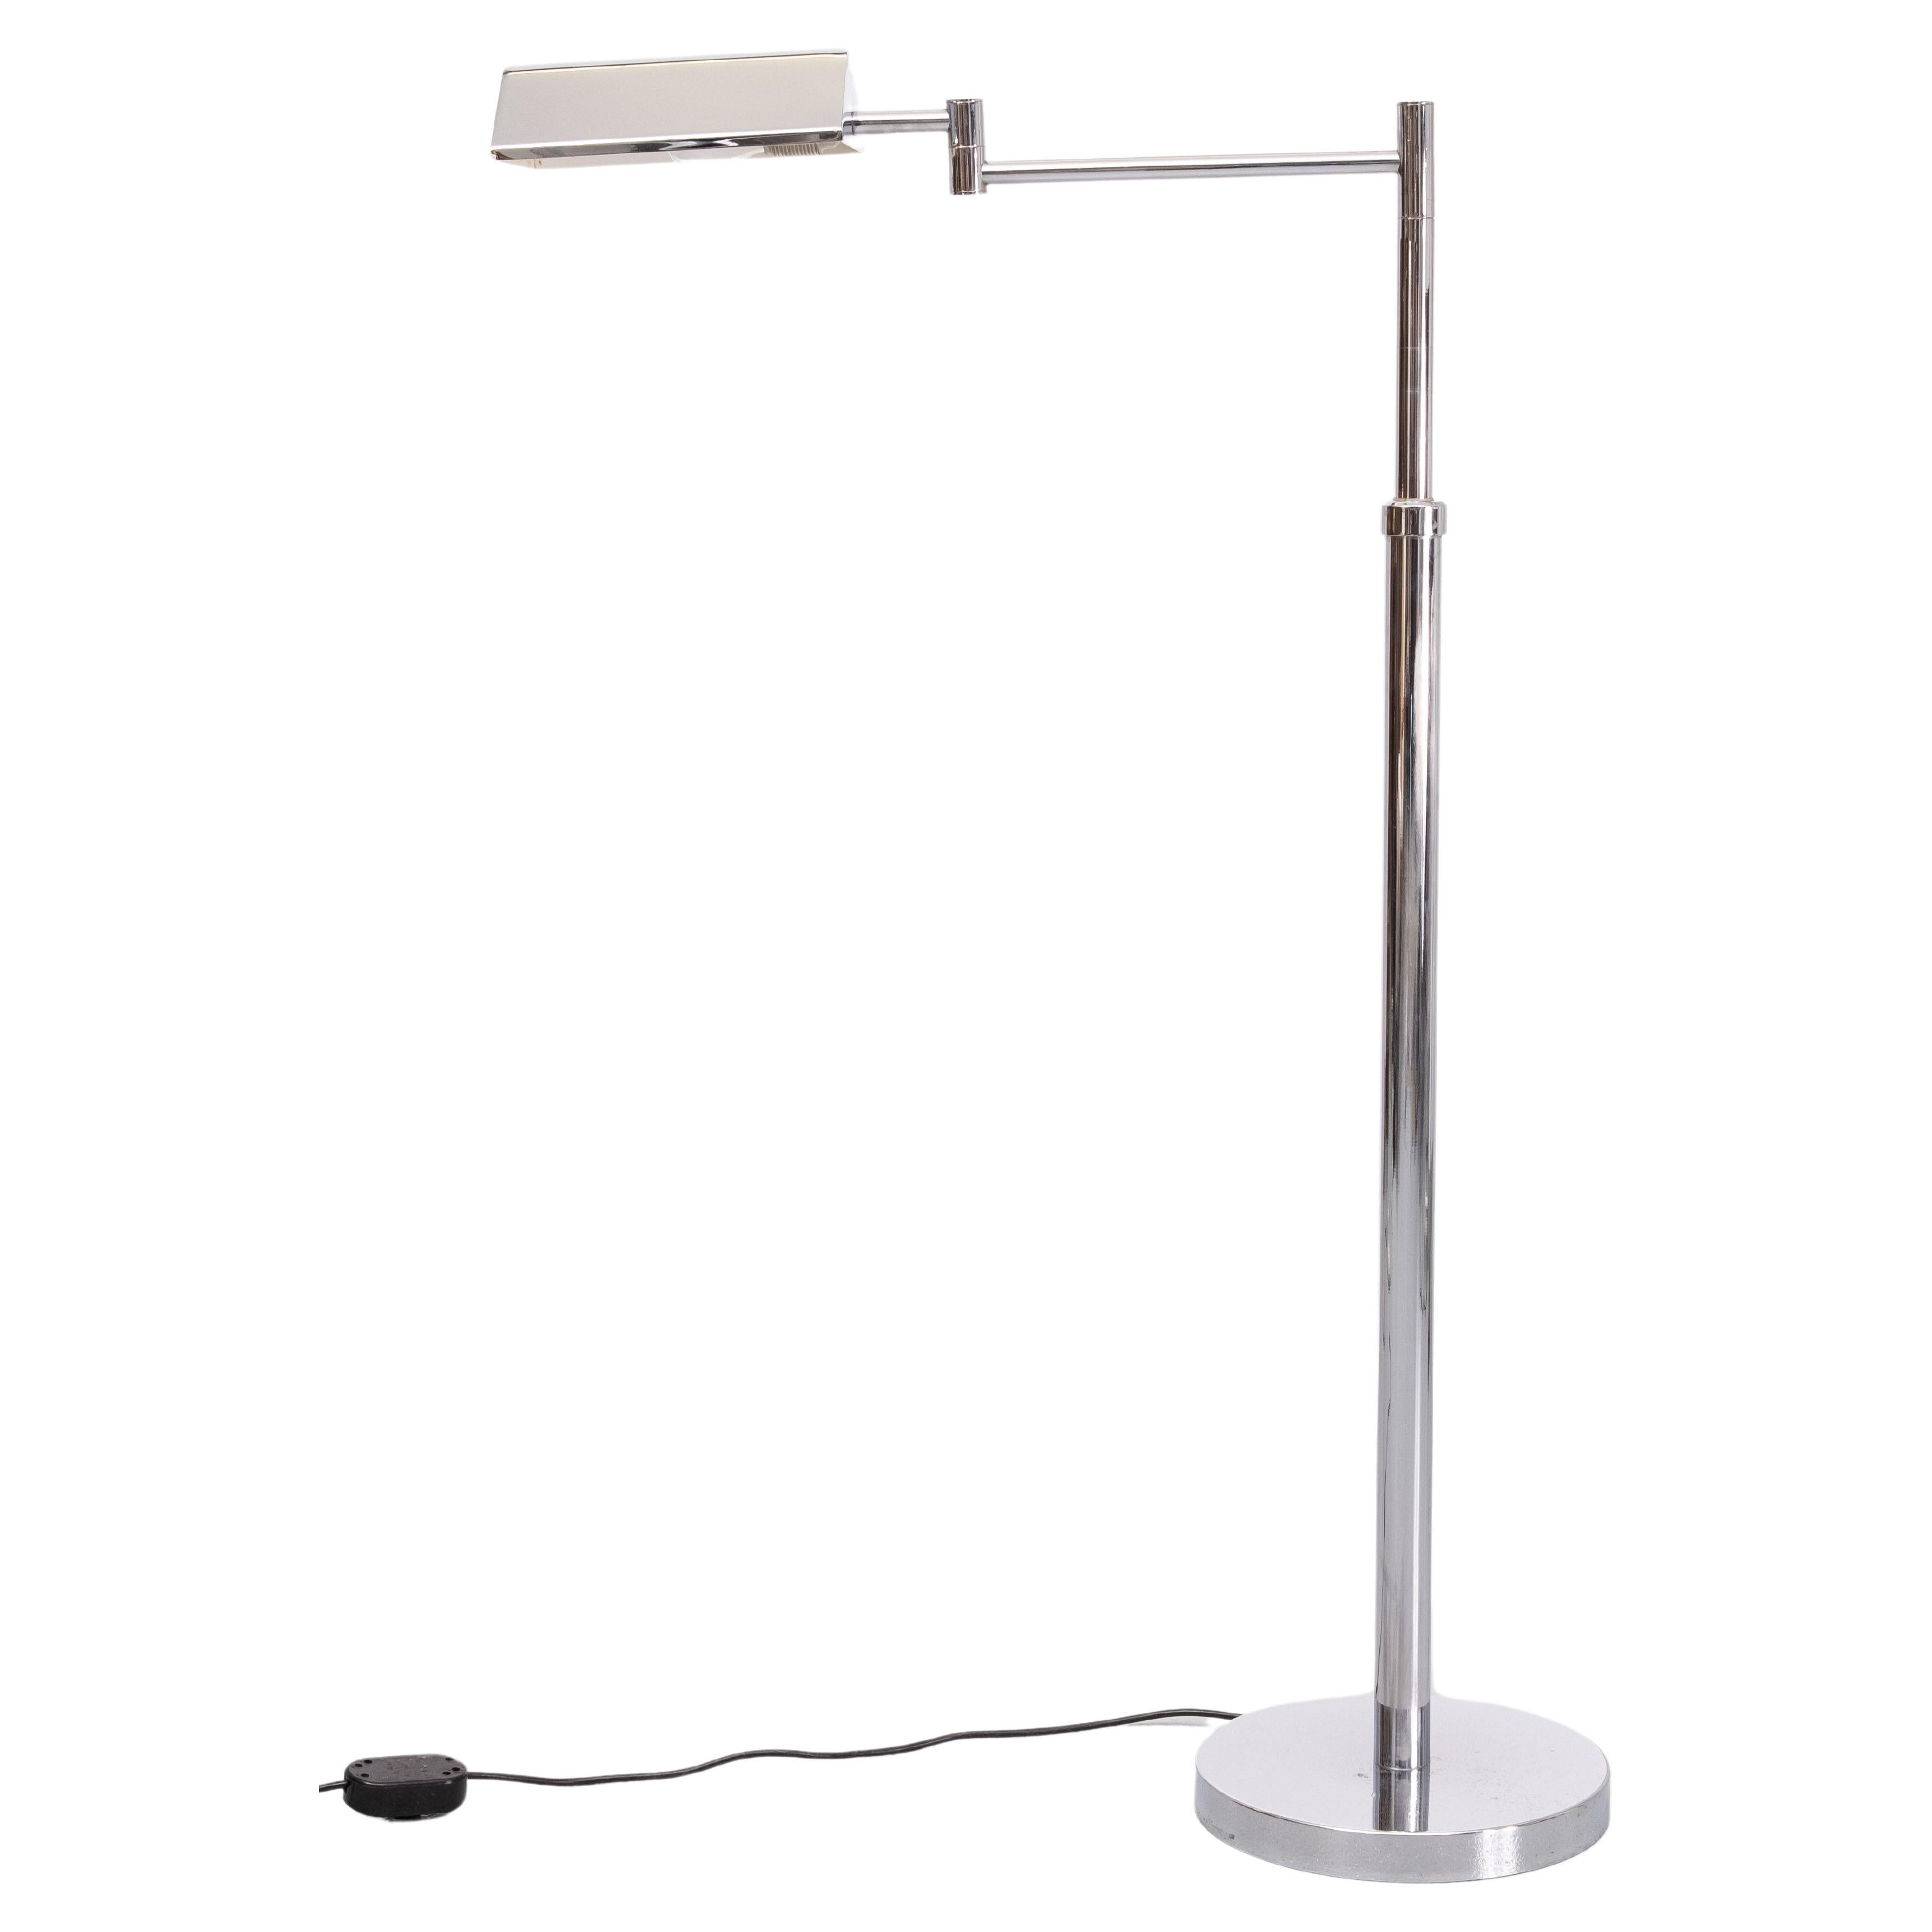 Top Quality Chrome Pharmacy floor lamp. Heavy cast Iron base .
thick chrome on Metal upright . Adjustable in height . 80 cm / 145 cm    Works perfect. 
One Large E27 bulb needed . so stylish.  wear on the base .